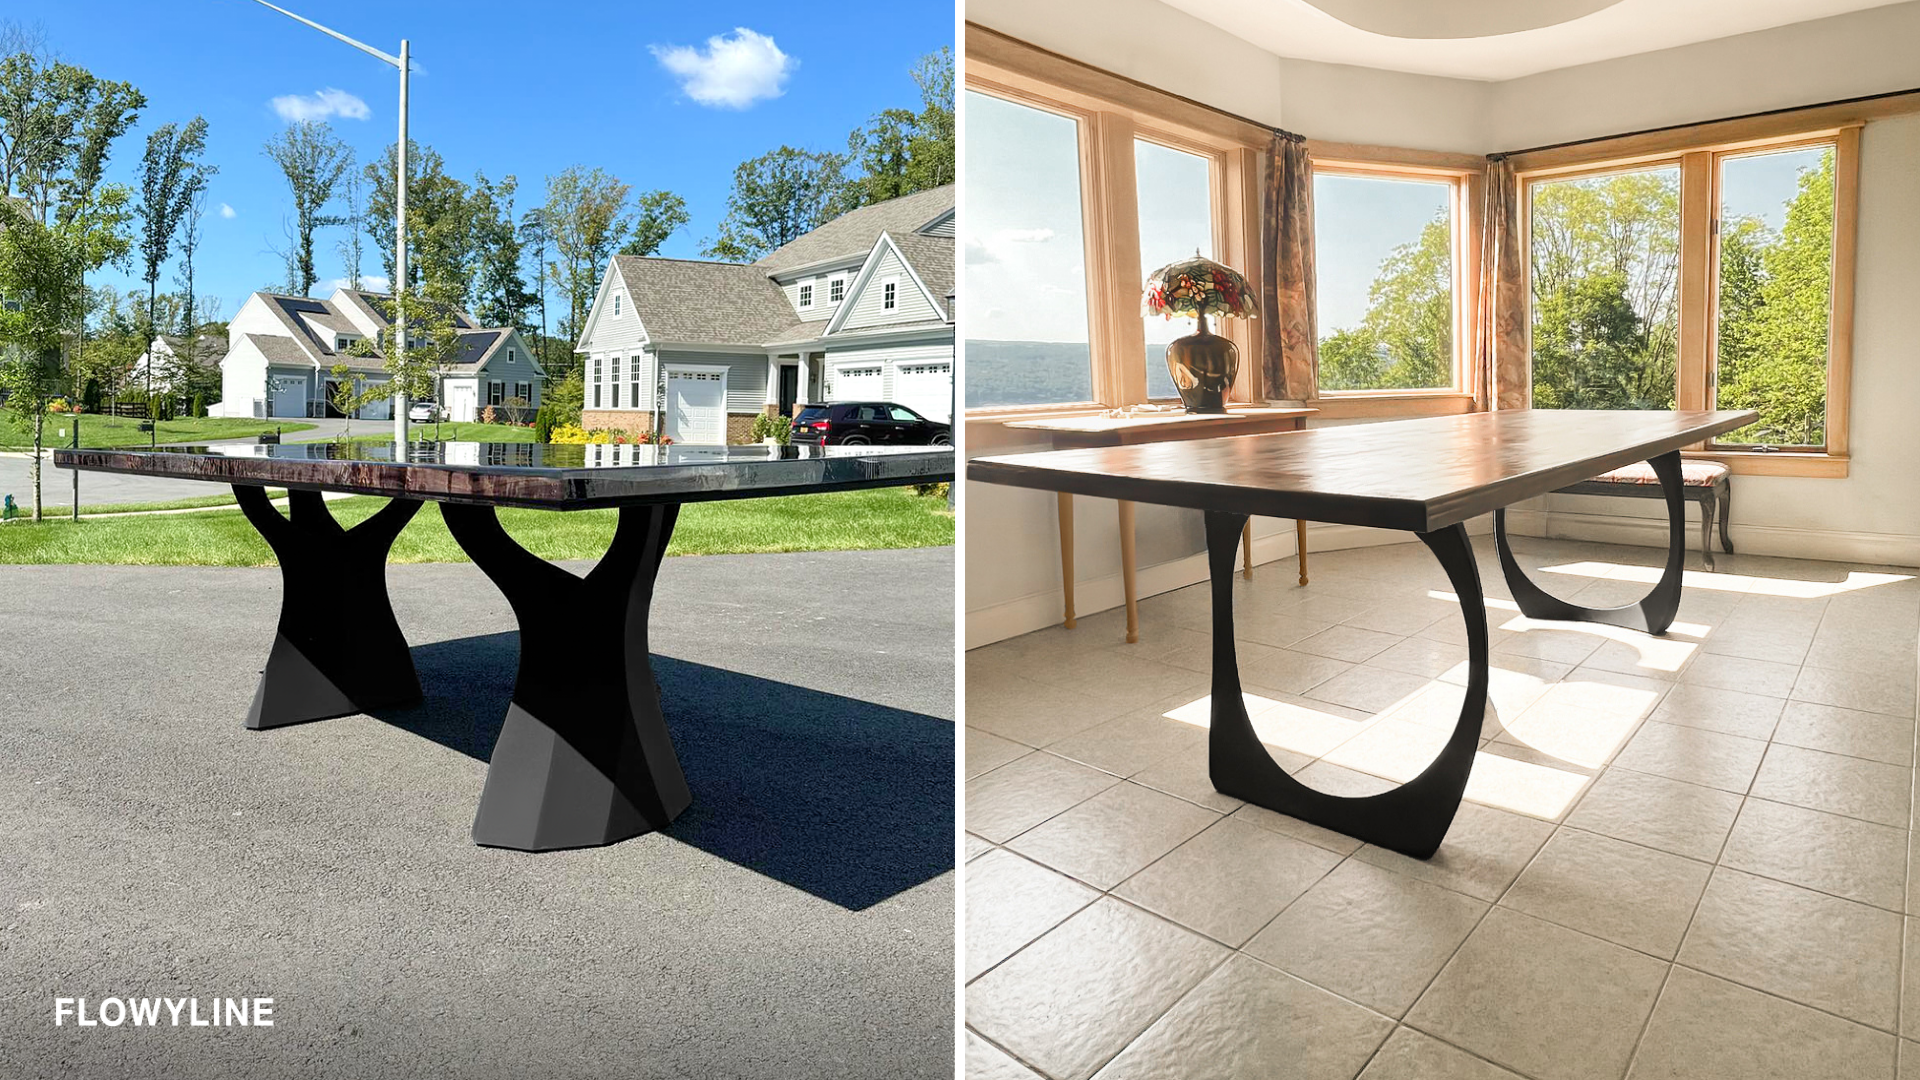 On Flowyline's website, you can discover distinctive metal table leg and base designs